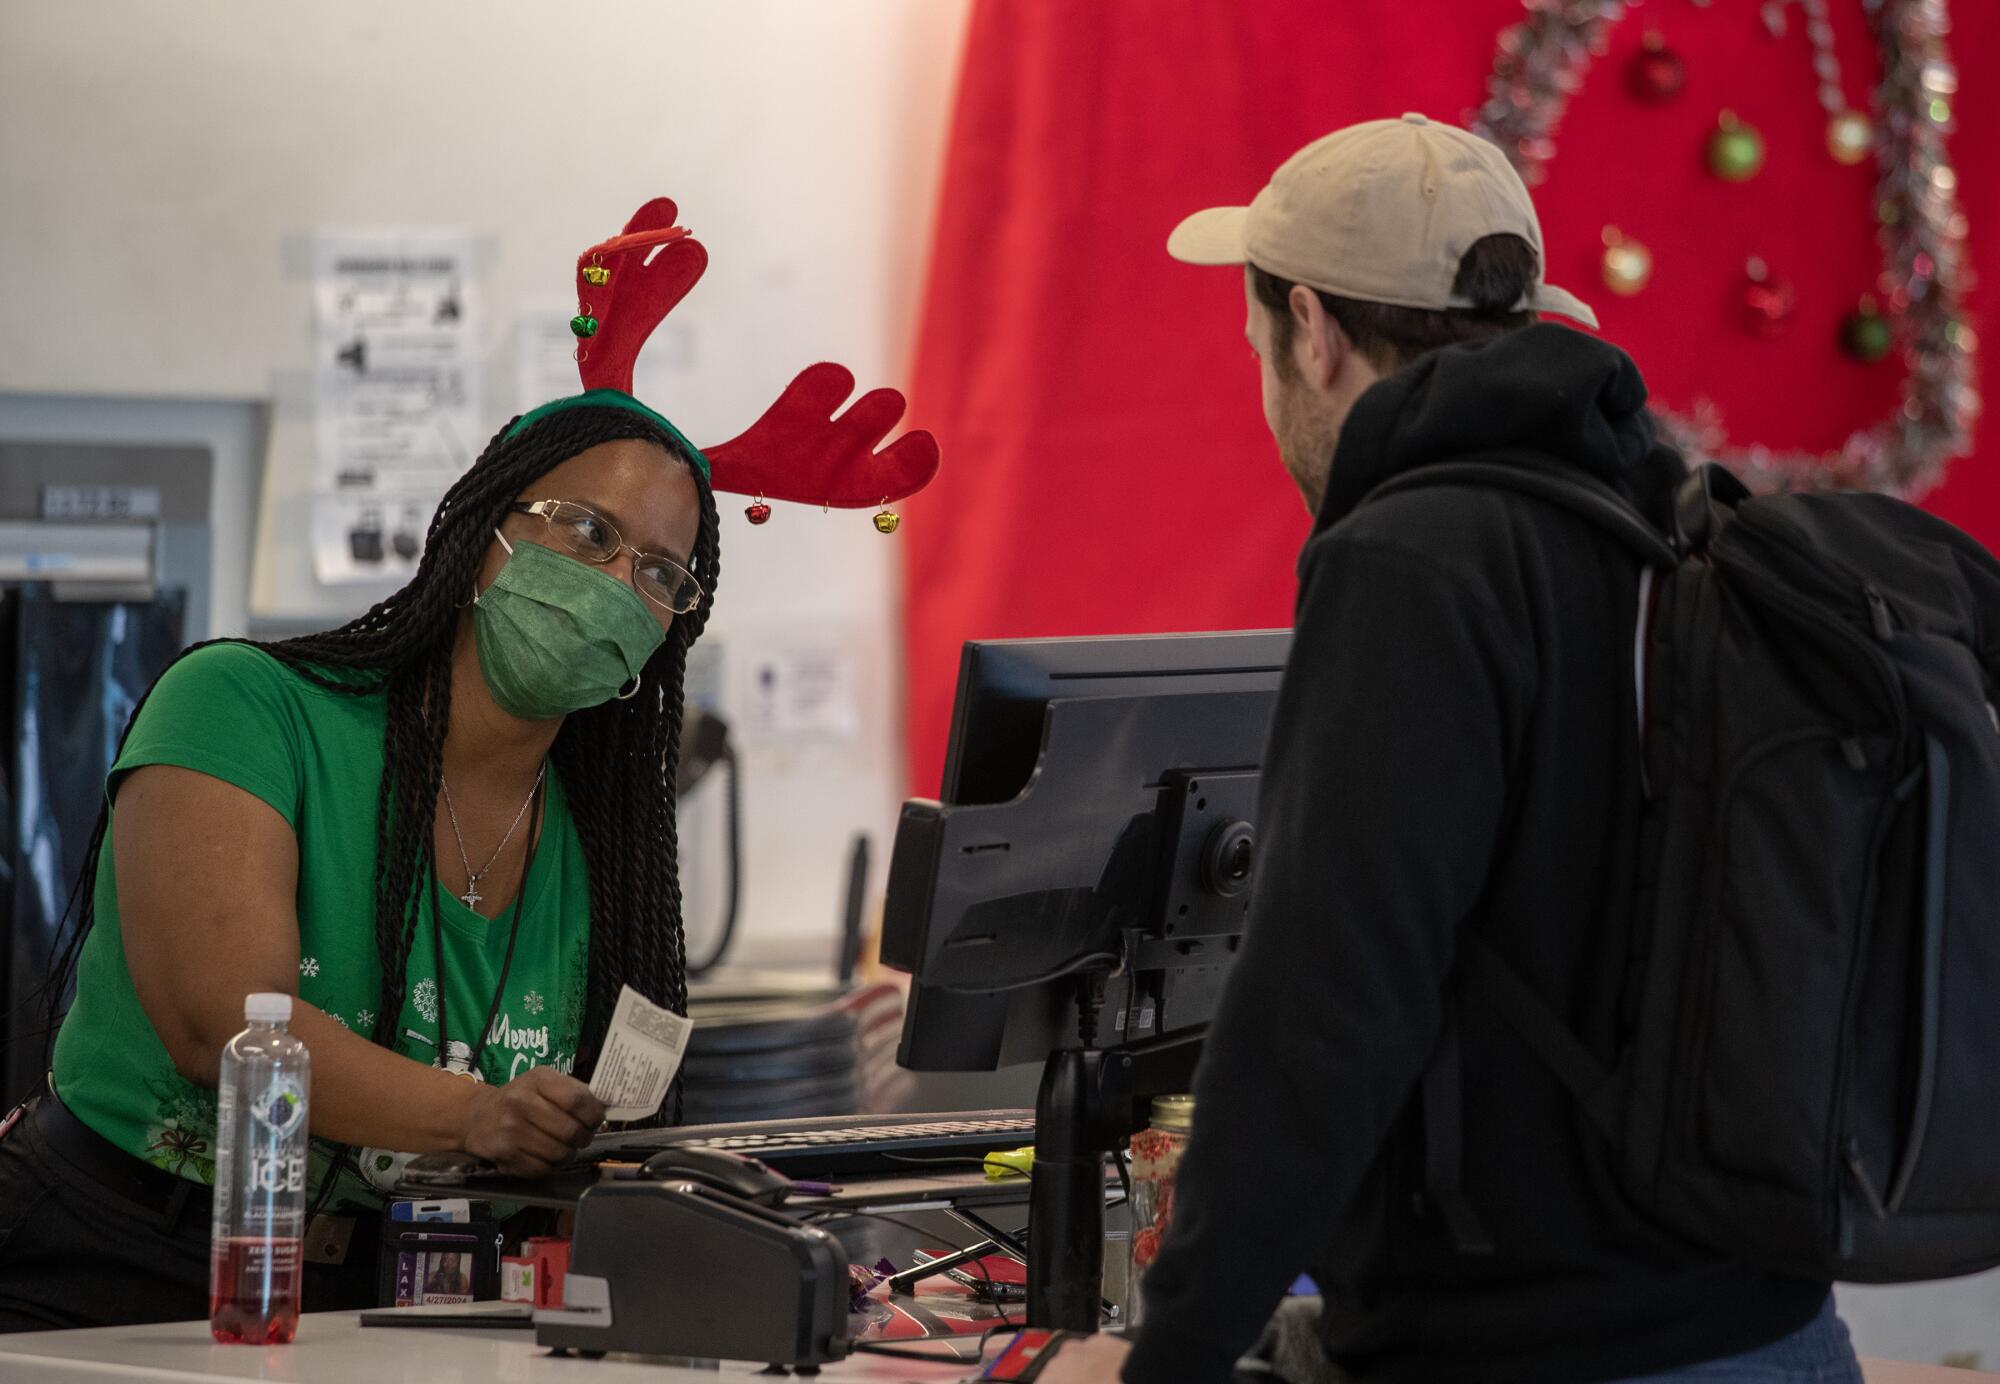 A woman wearing a green shirt and red antlers helps a holiday traveler.